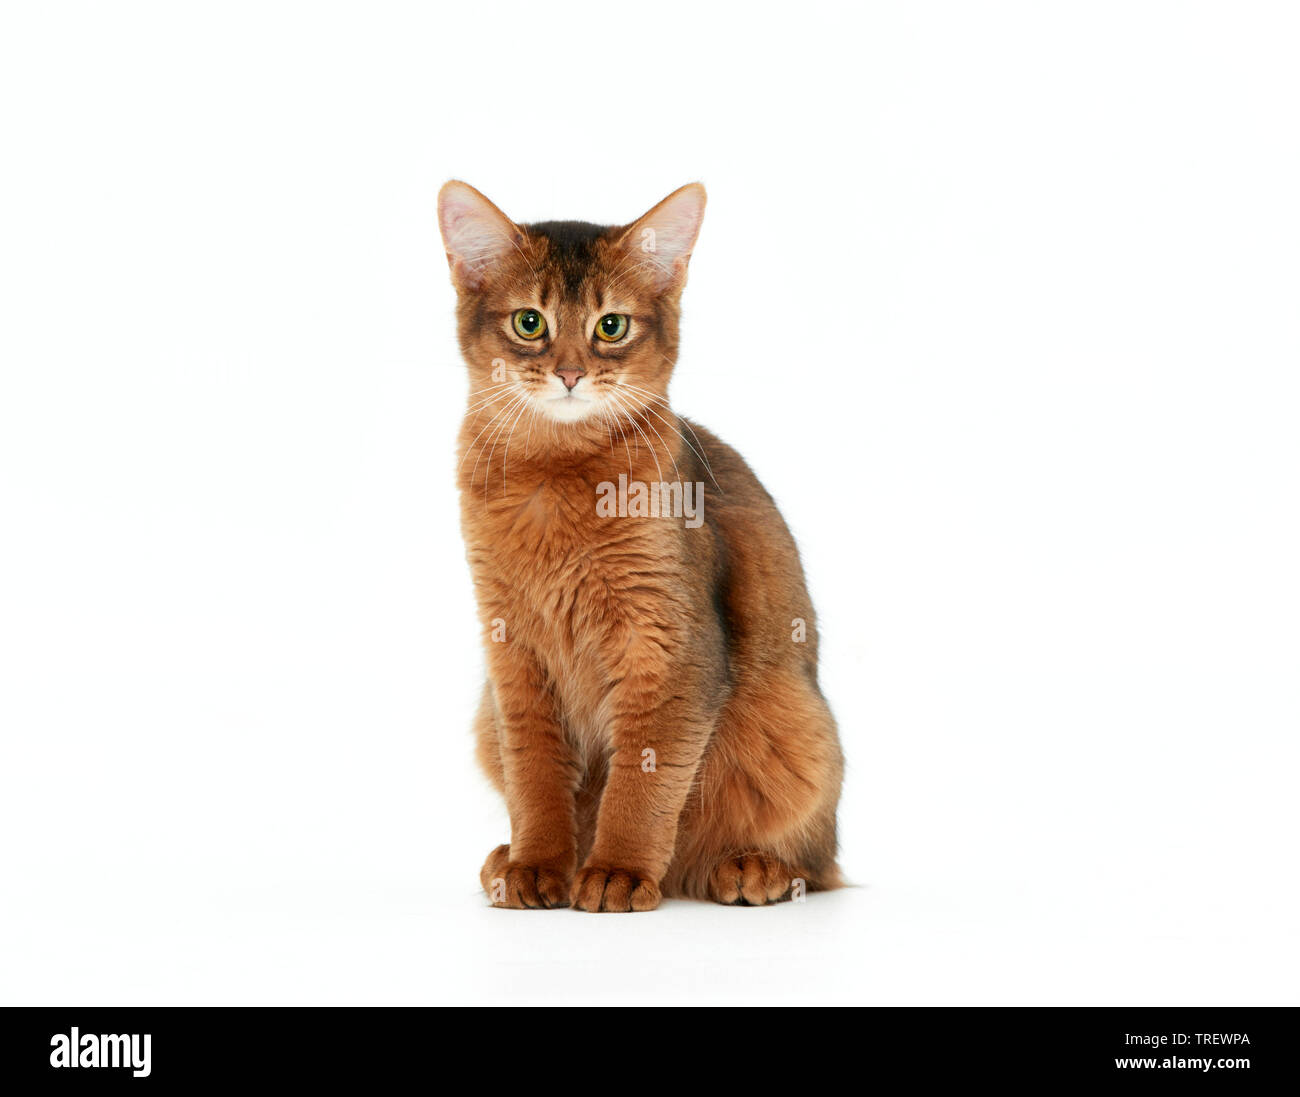 Somali cat. Kitten sitting, seen head-on. Studio picture against a white background Stock Photo